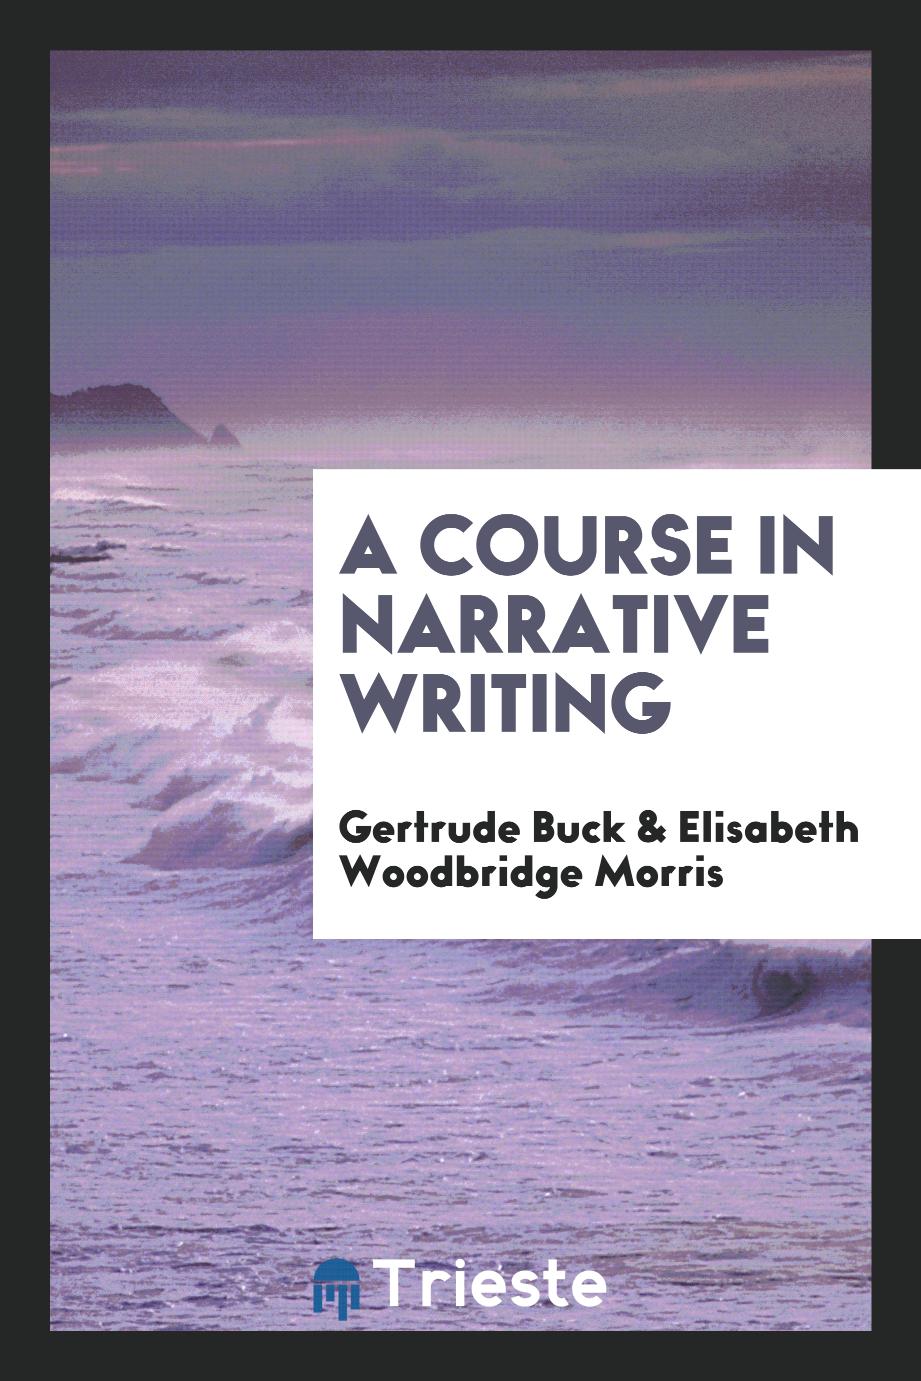 A course in narrative writing